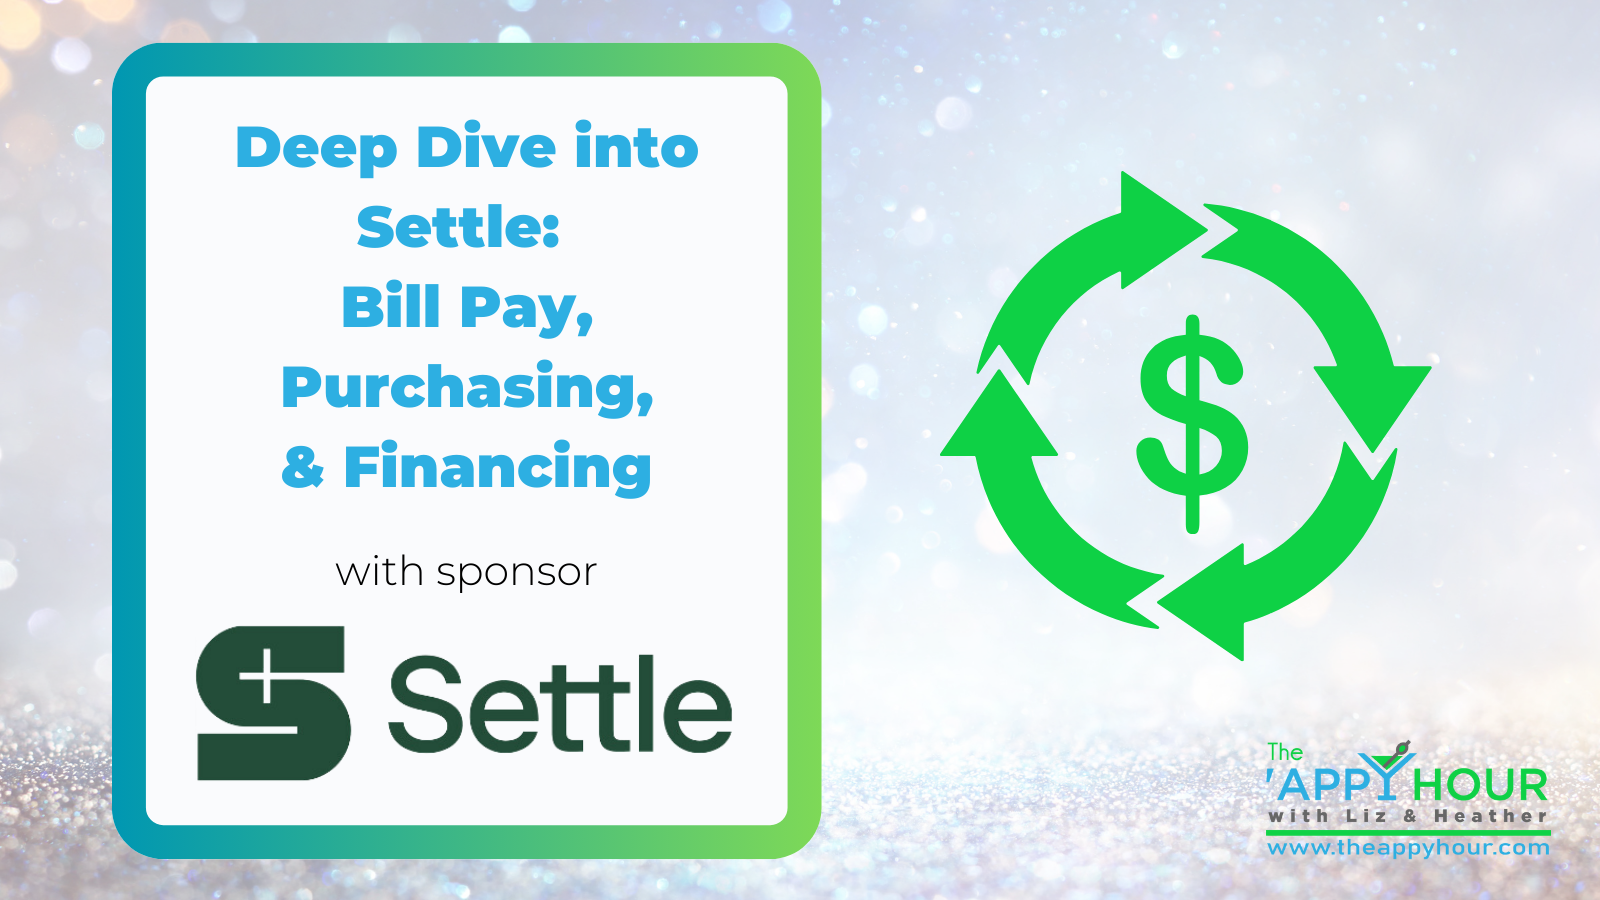 A Deep Dive Into Settle: Bill Pay, Purchasing, & Financing